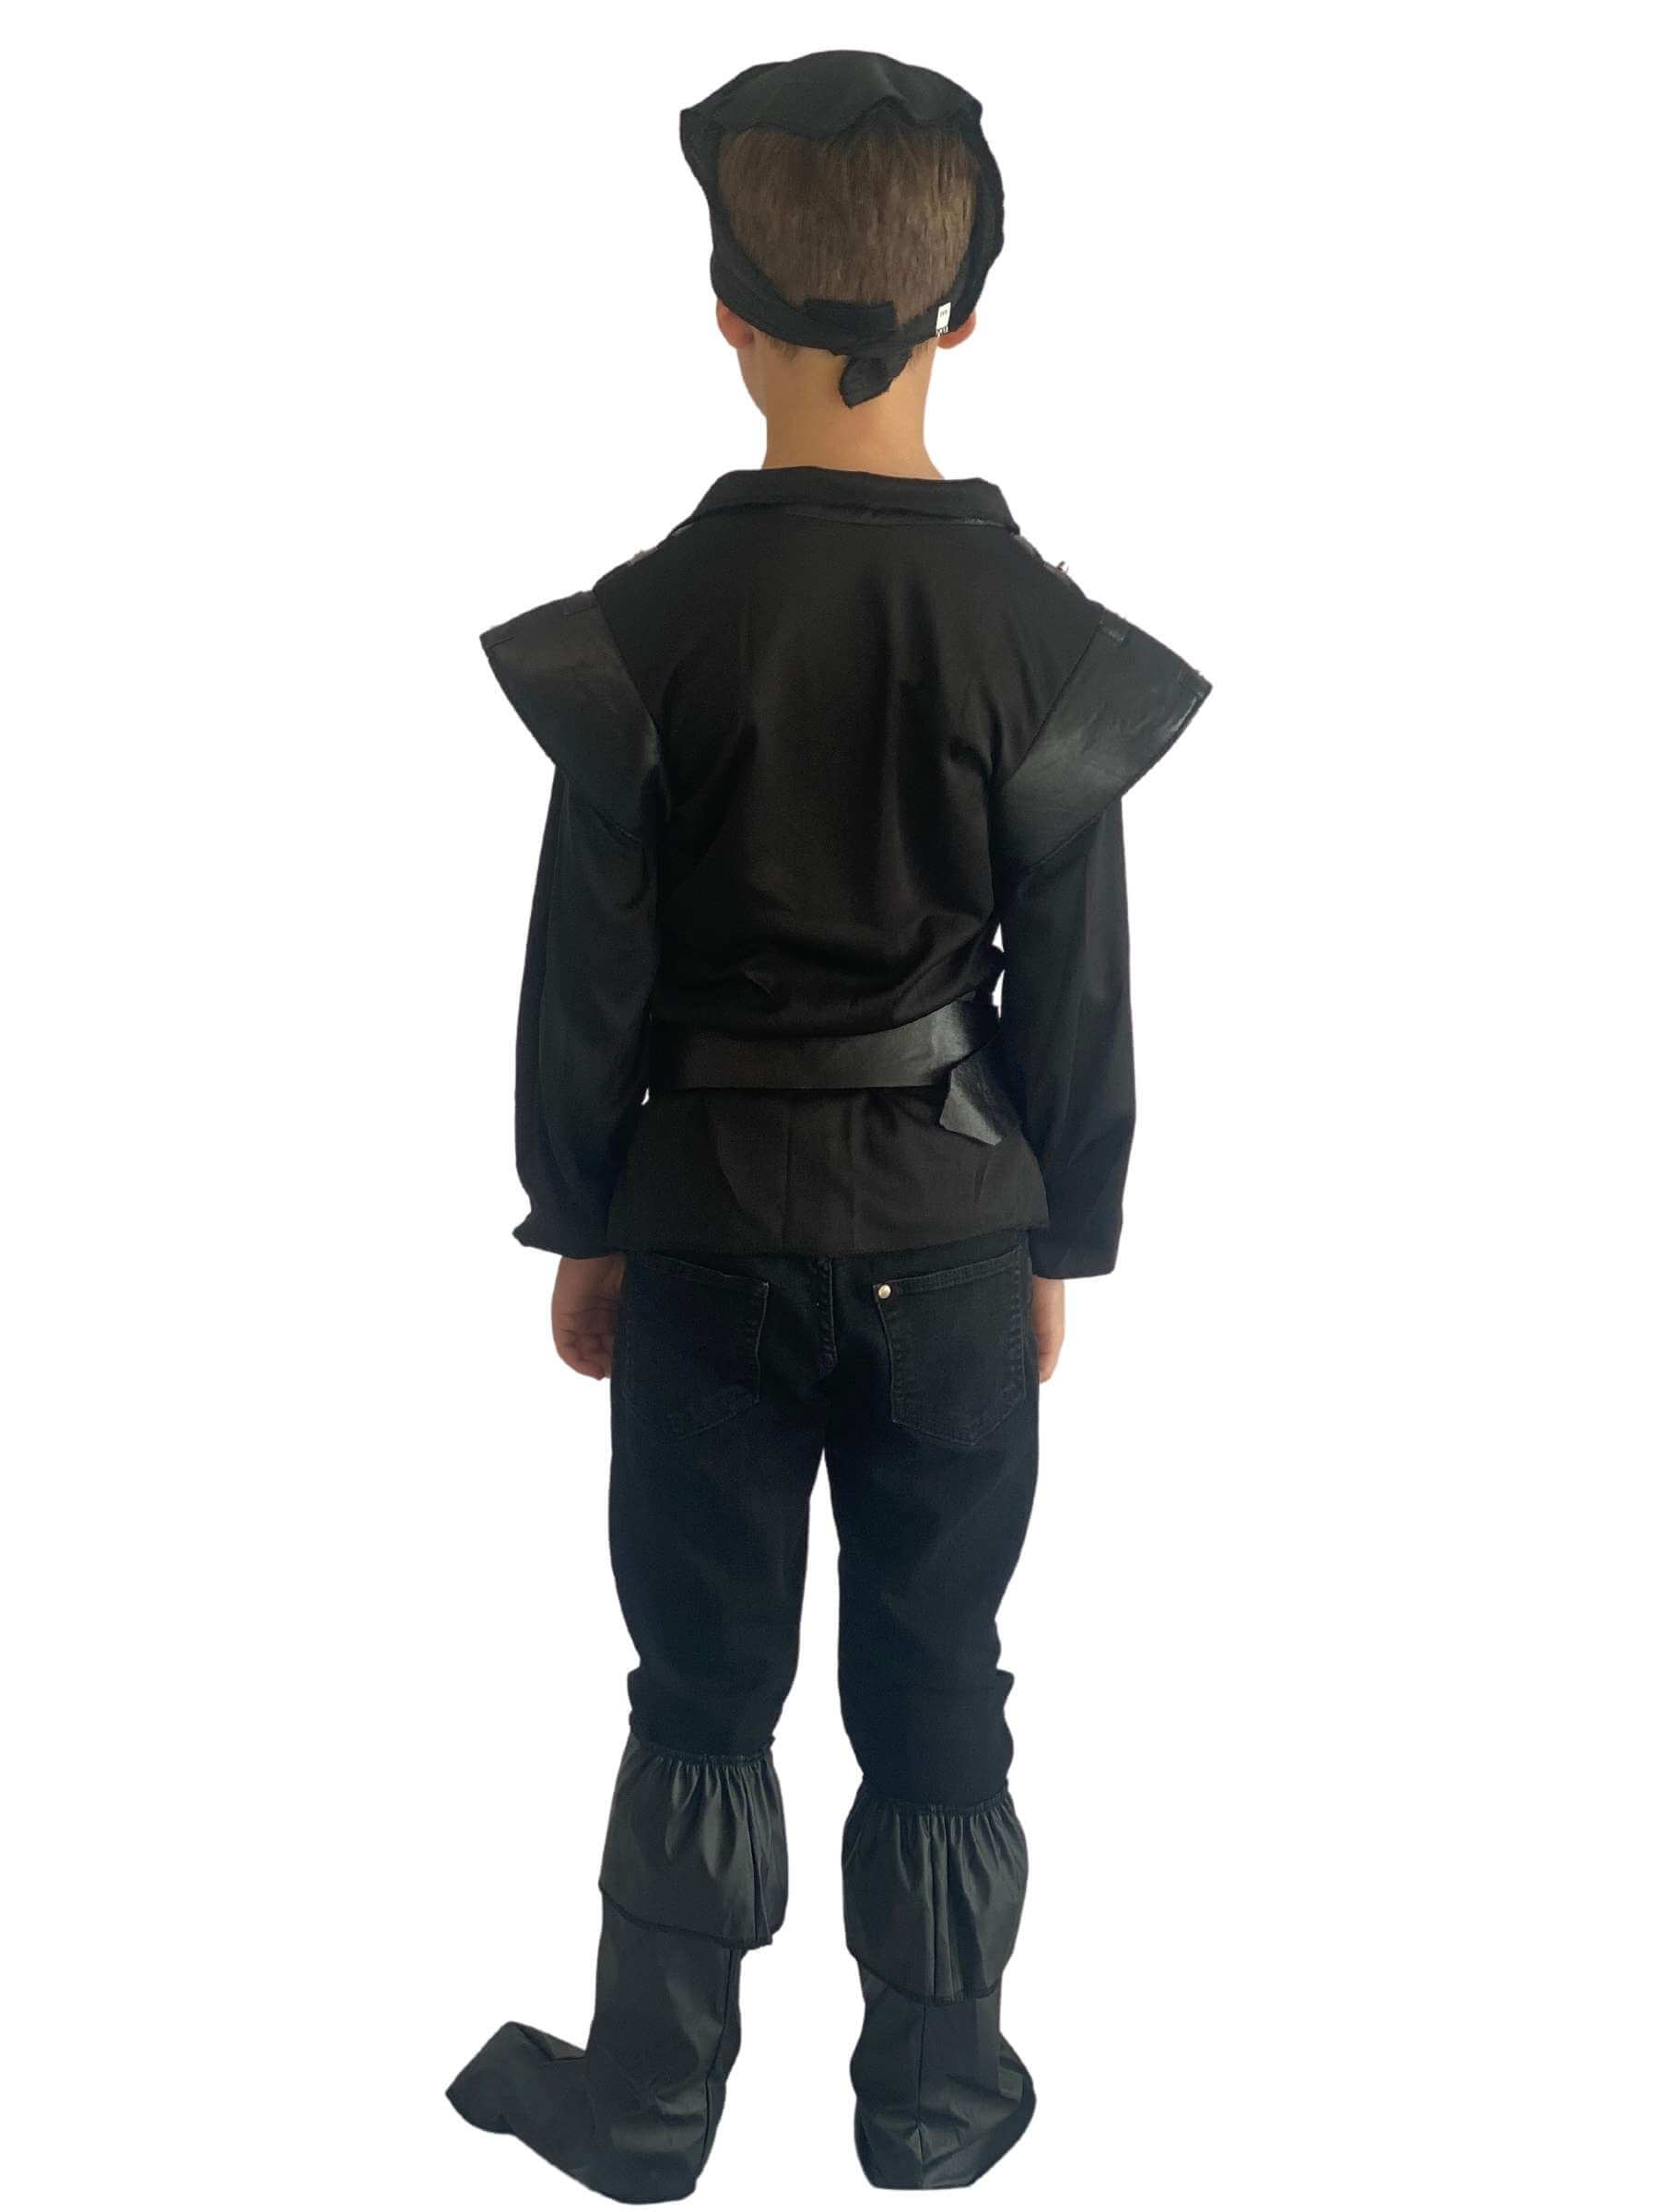 The back of a boy wearing a back pirate costume.